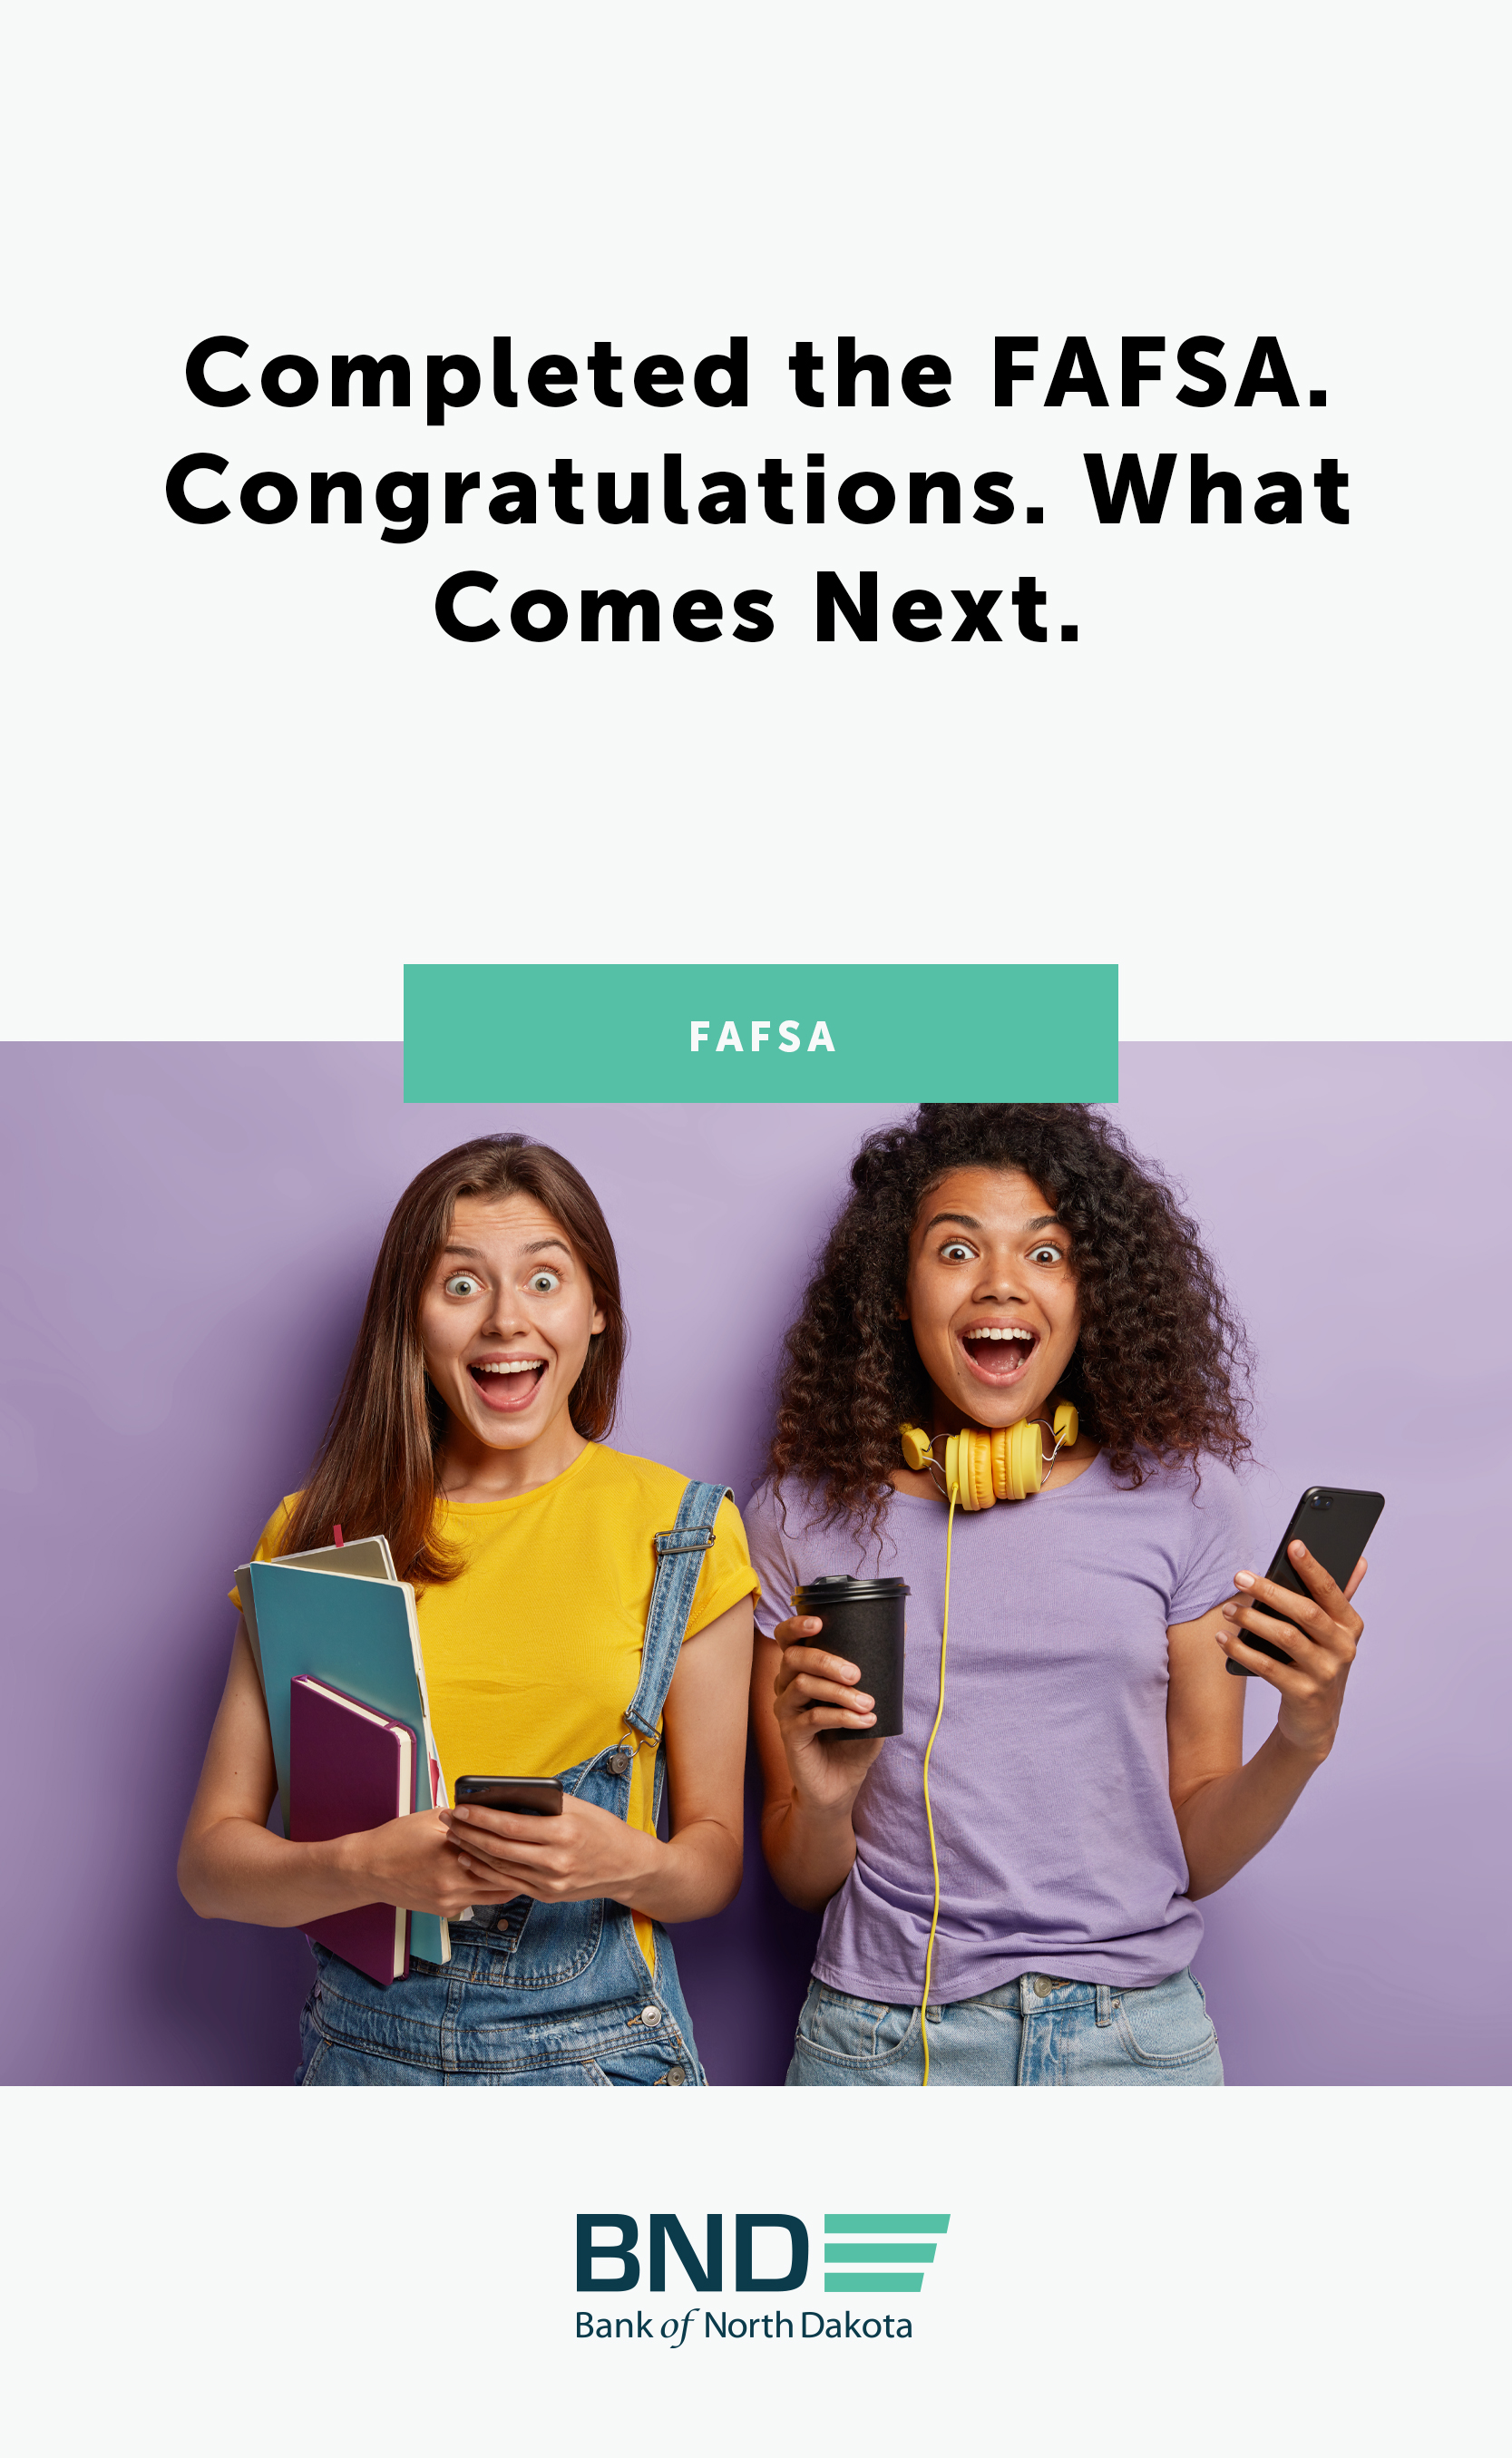 Completed-the-FAFSA-Congrats